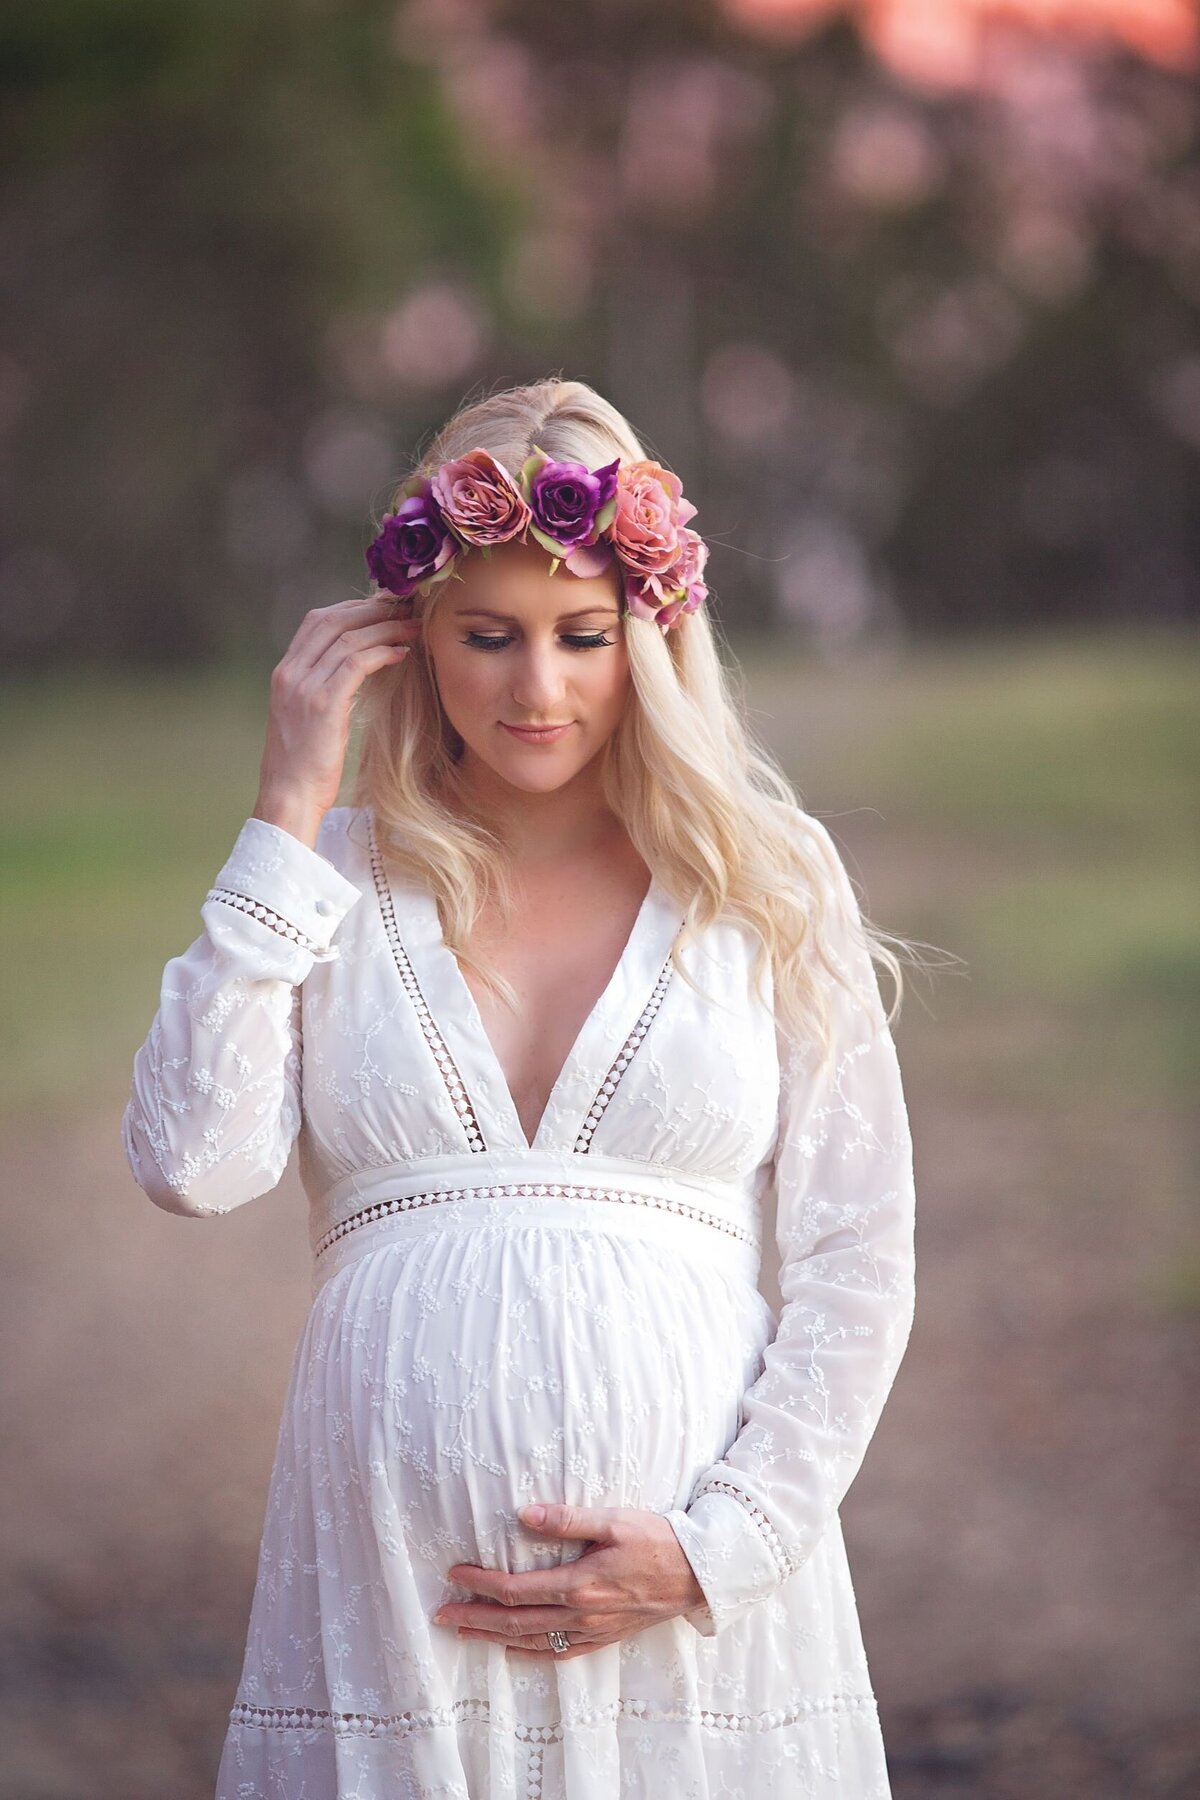 Bridie_Charlotte_Photography_Maternity (4)